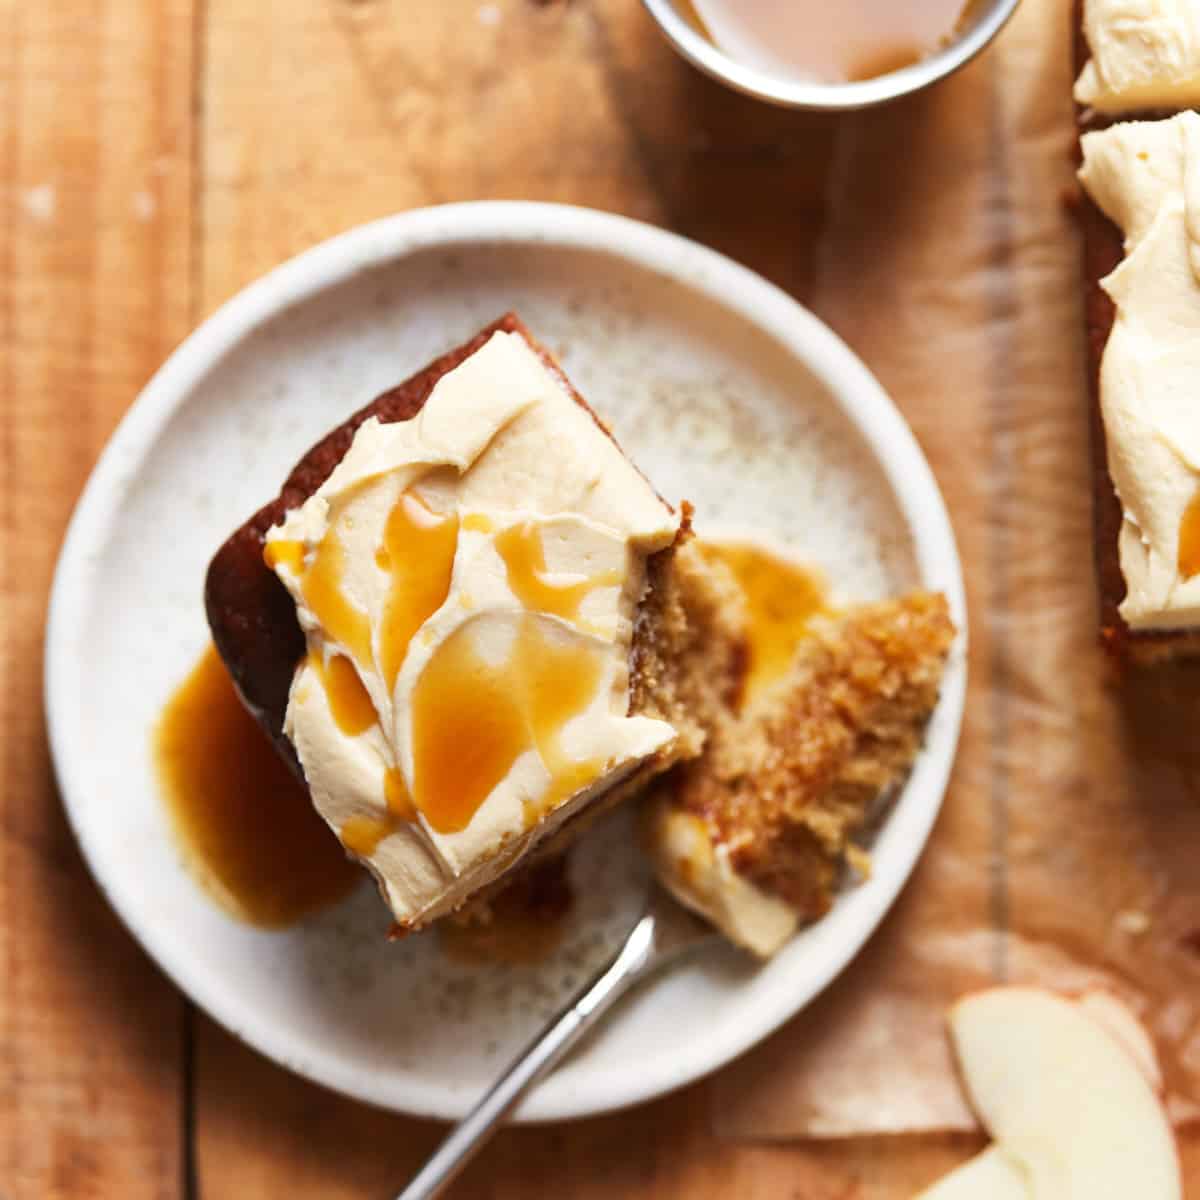 A slice of frosted apple cake with caramel syrup on a plate with a bite missing